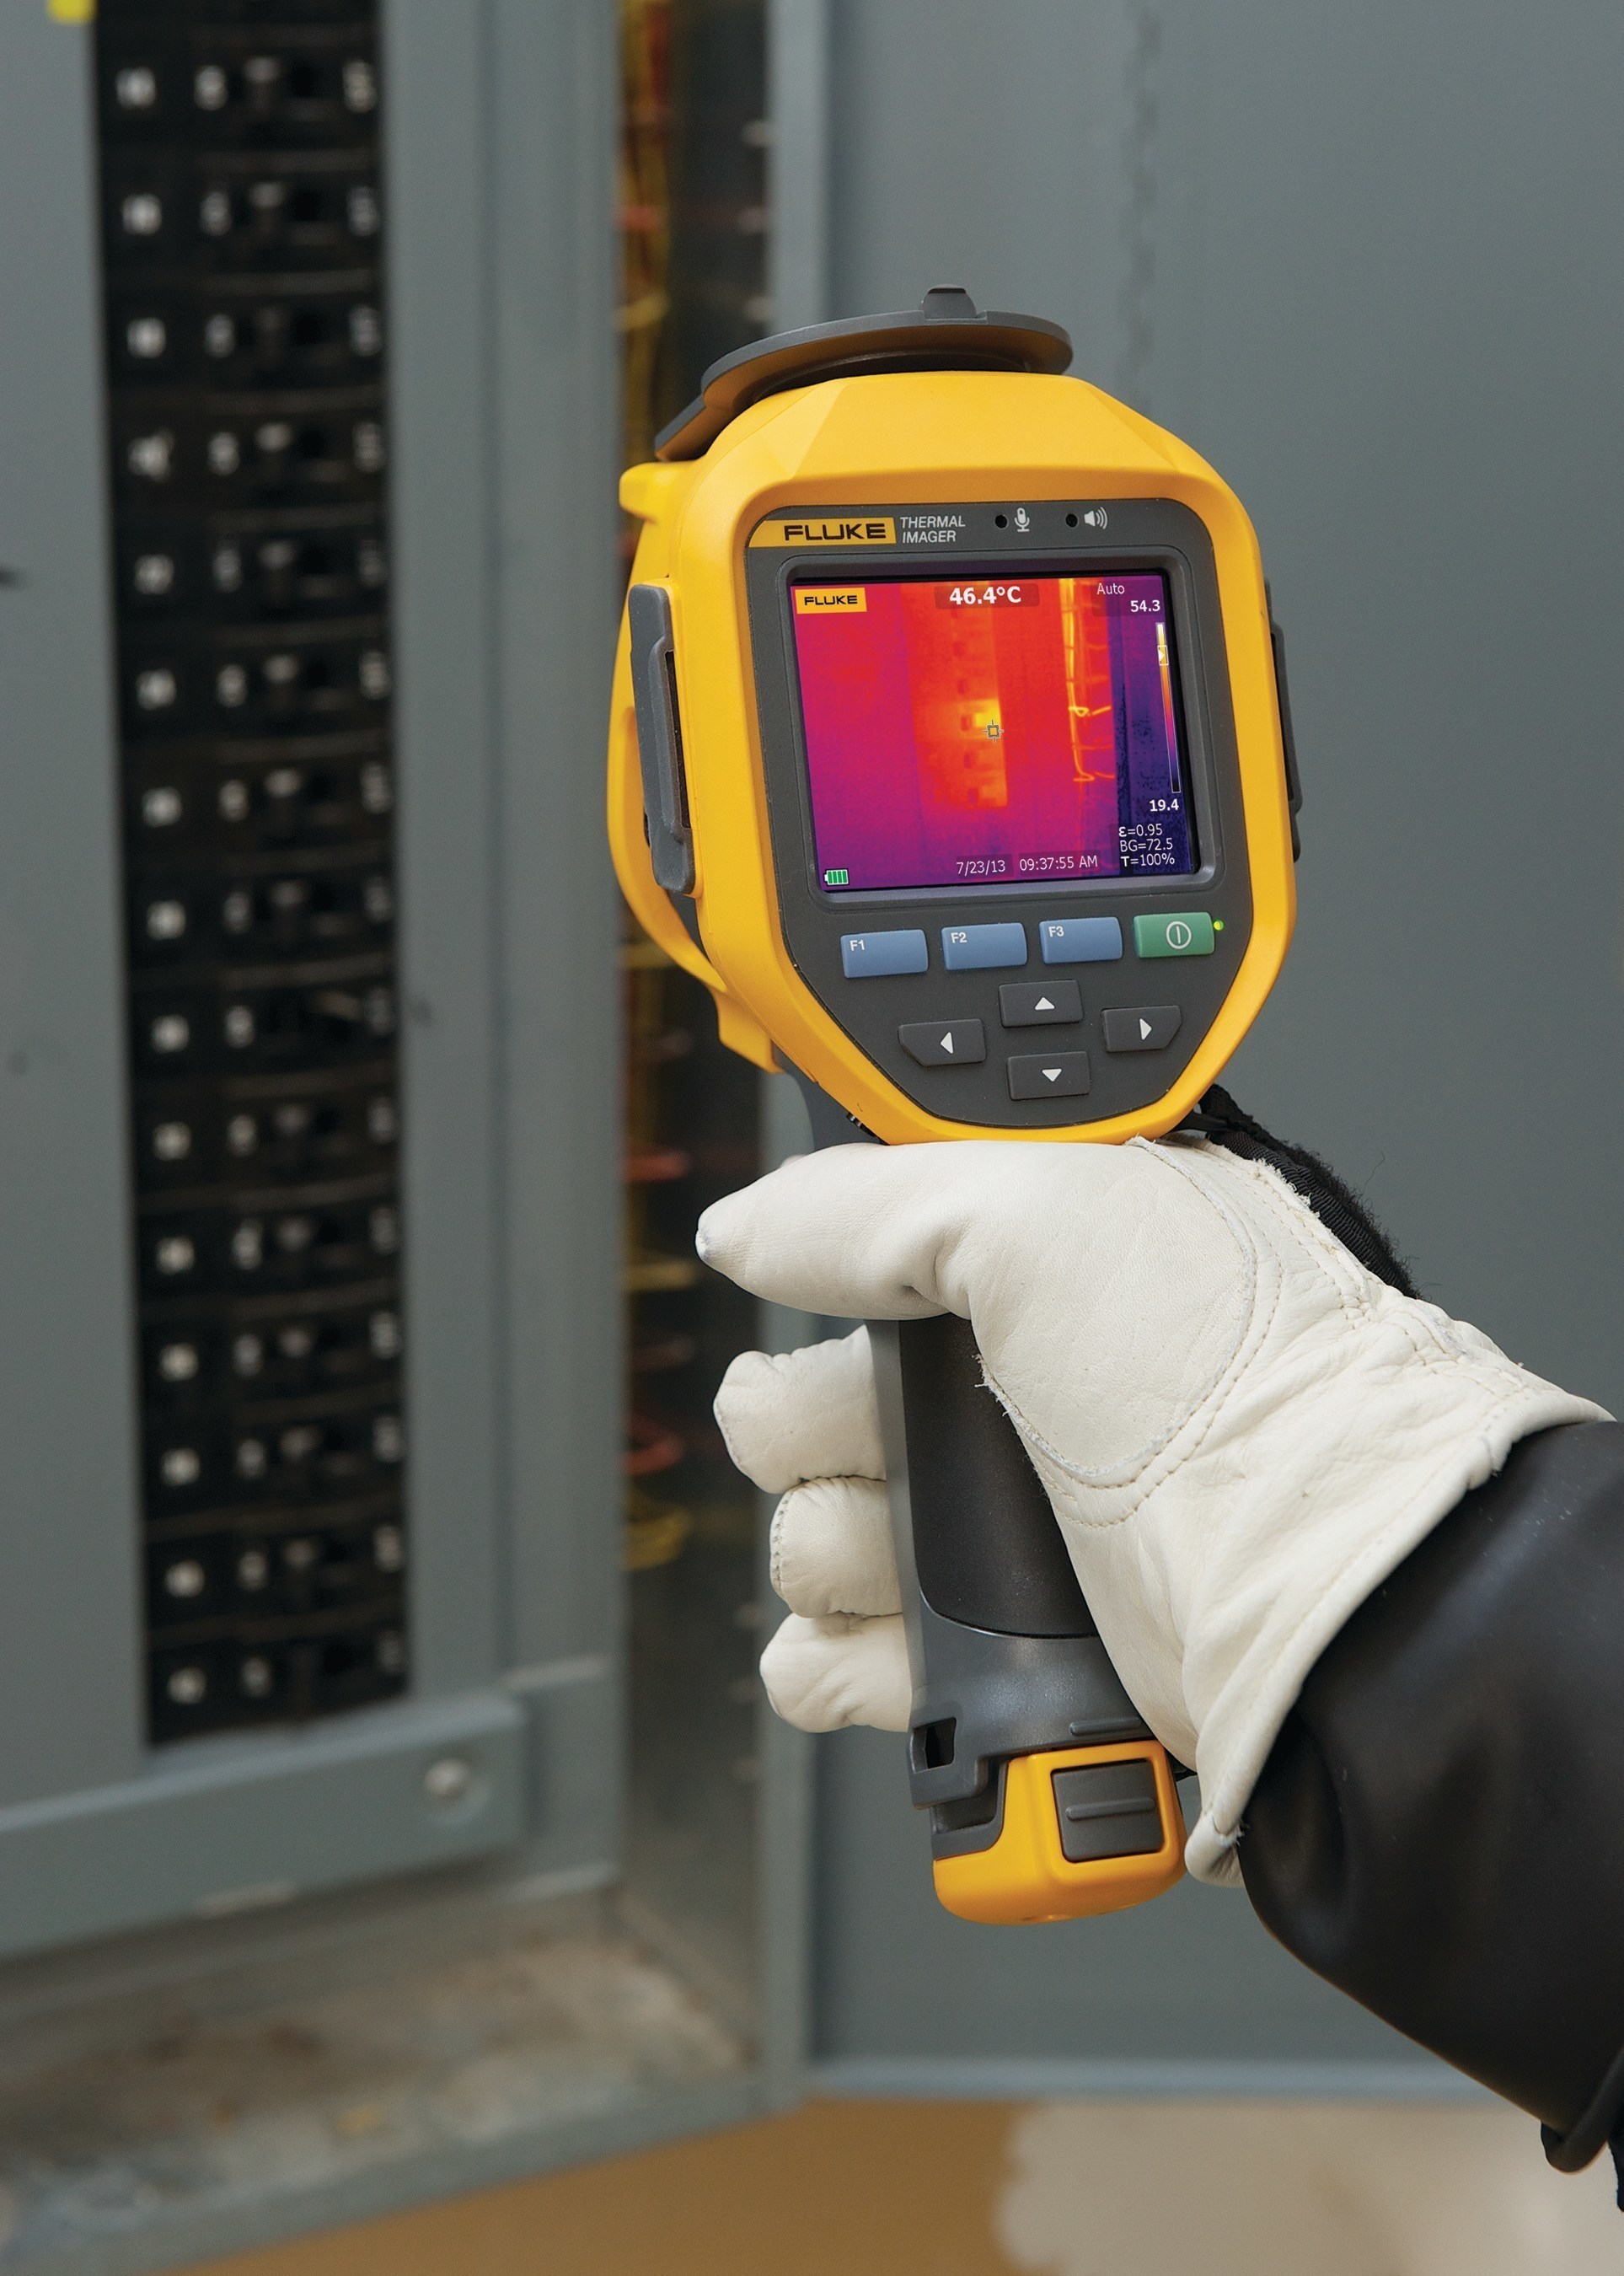 The Ti400 Infrared Camera has advanced connectivity and accuracy to maximize technicians' productivity in the field. It features LaserSharp Auto Focus, which uses a built-in laser distance meter to calculate and display the distance to the designated target with pinpoint accuracy. The camera, which is also part of the Fluke Connect system, includes voice annotation, eliminating the need to write down notes, Fluke SmartView software, a professional suite of analysis and reporting tools for optimizing and analyzing infrared images and producing professional reports, and optional field installable telephoto and wide angle lenses for added versatility.